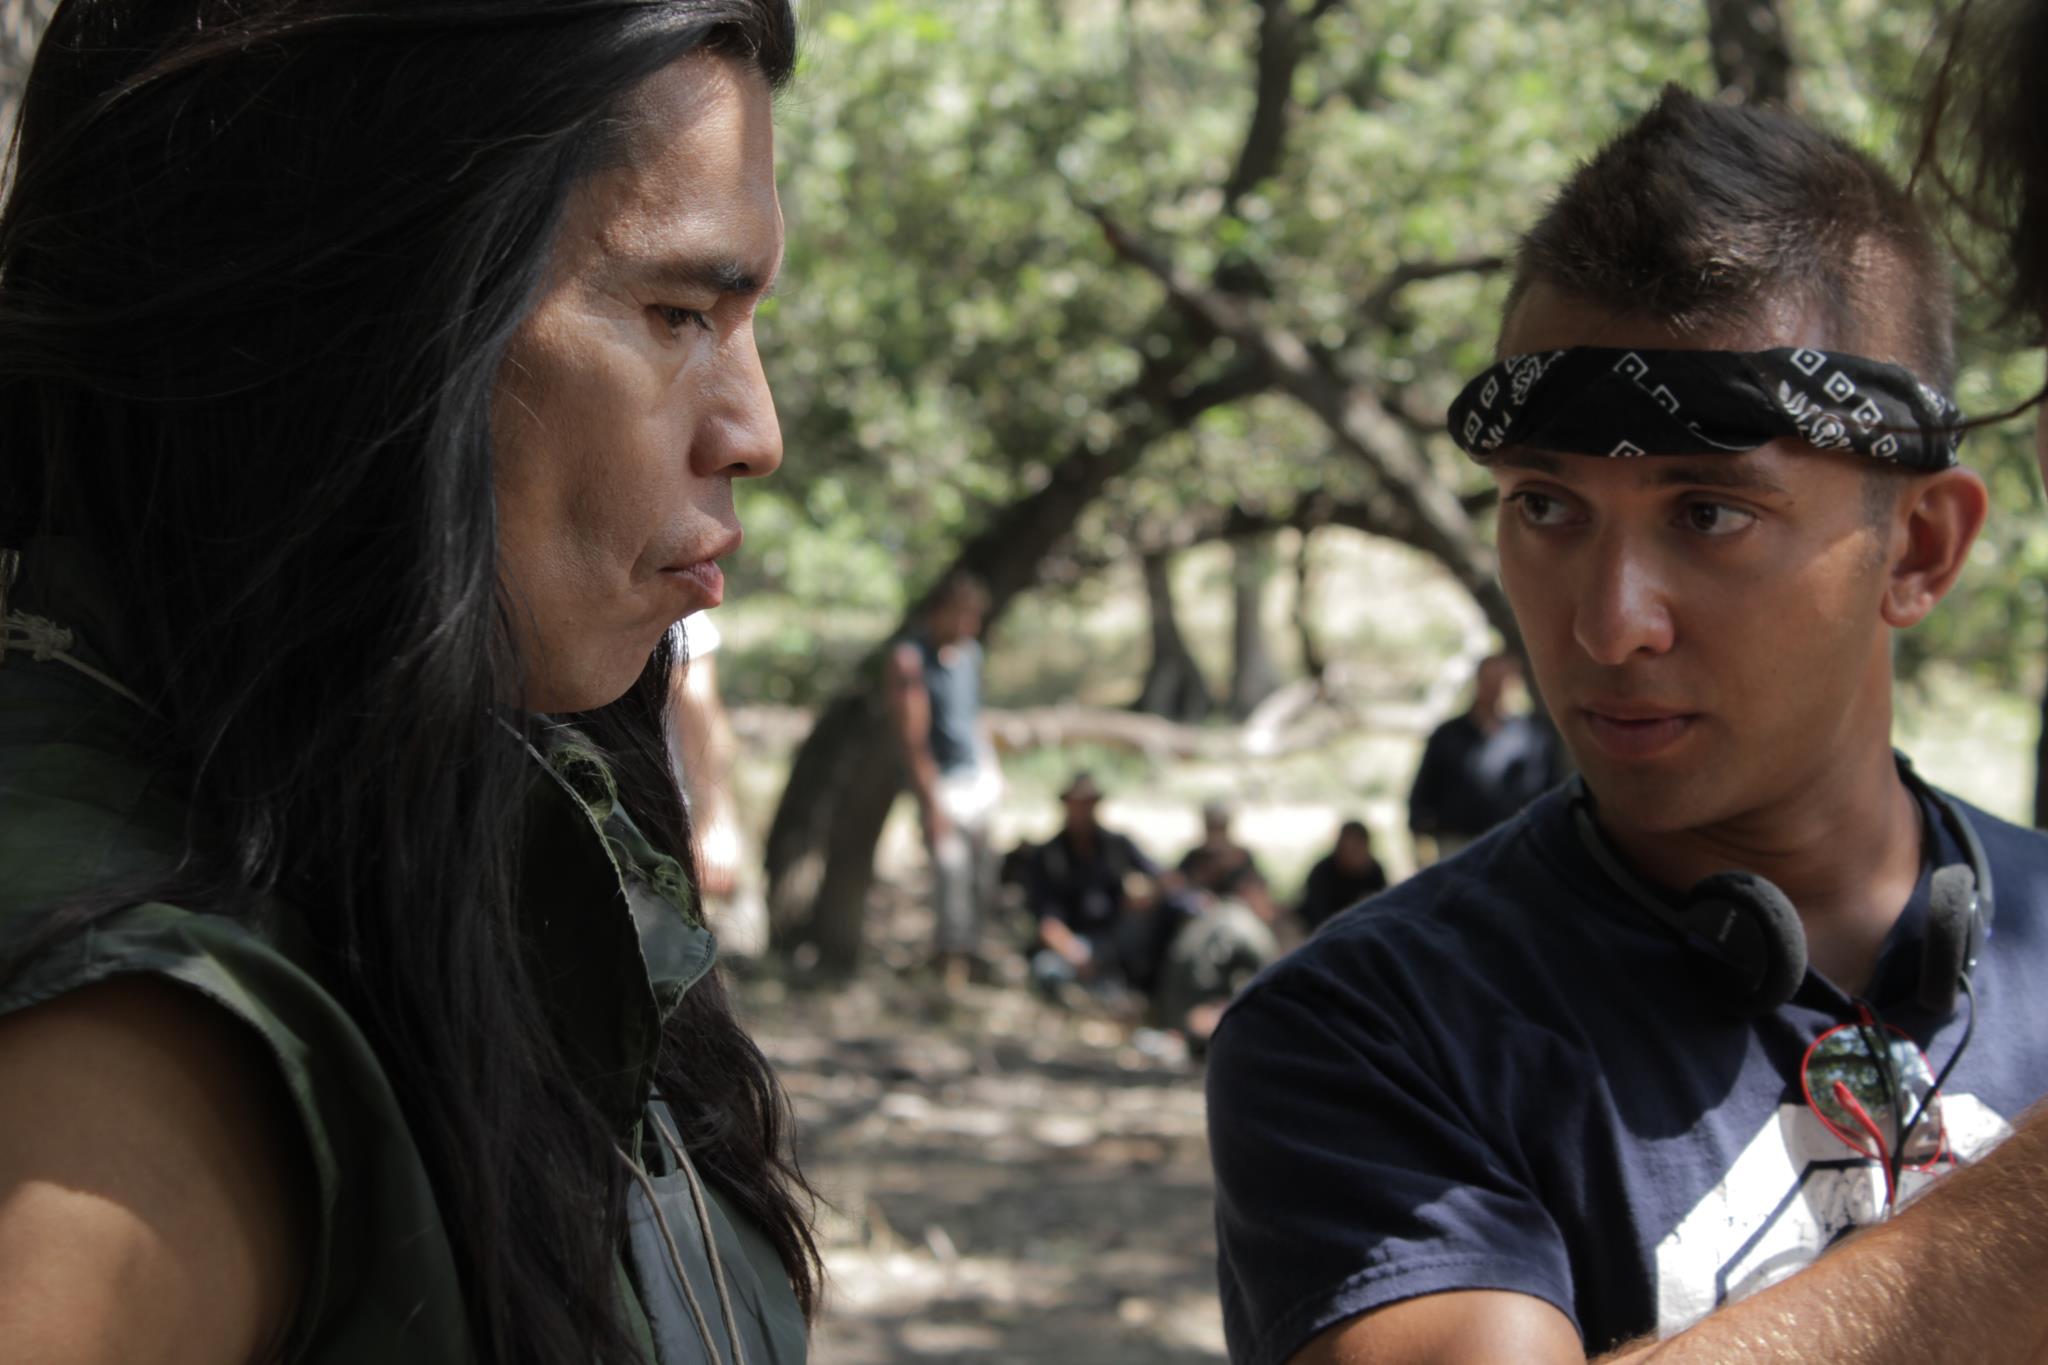 Blocking a stunt with David Midthunder (The Last Stand, Comanche Moon) on the set of 'Dust of War'